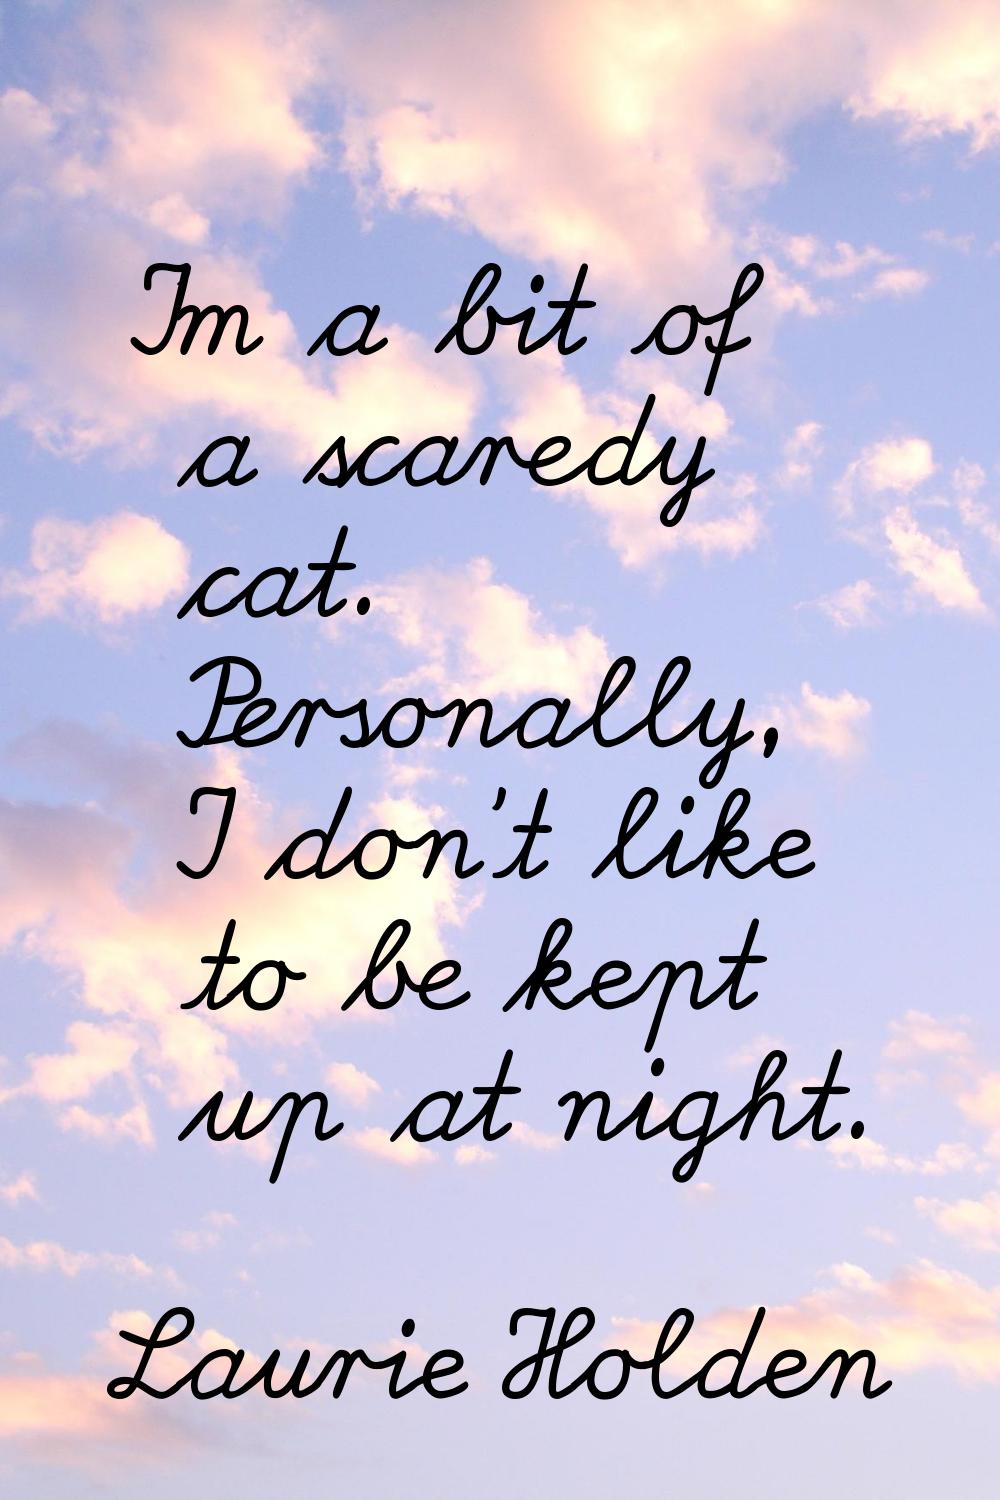 I'm a bit of a scaredy cat. Personally, I don't like to be kept up at night.